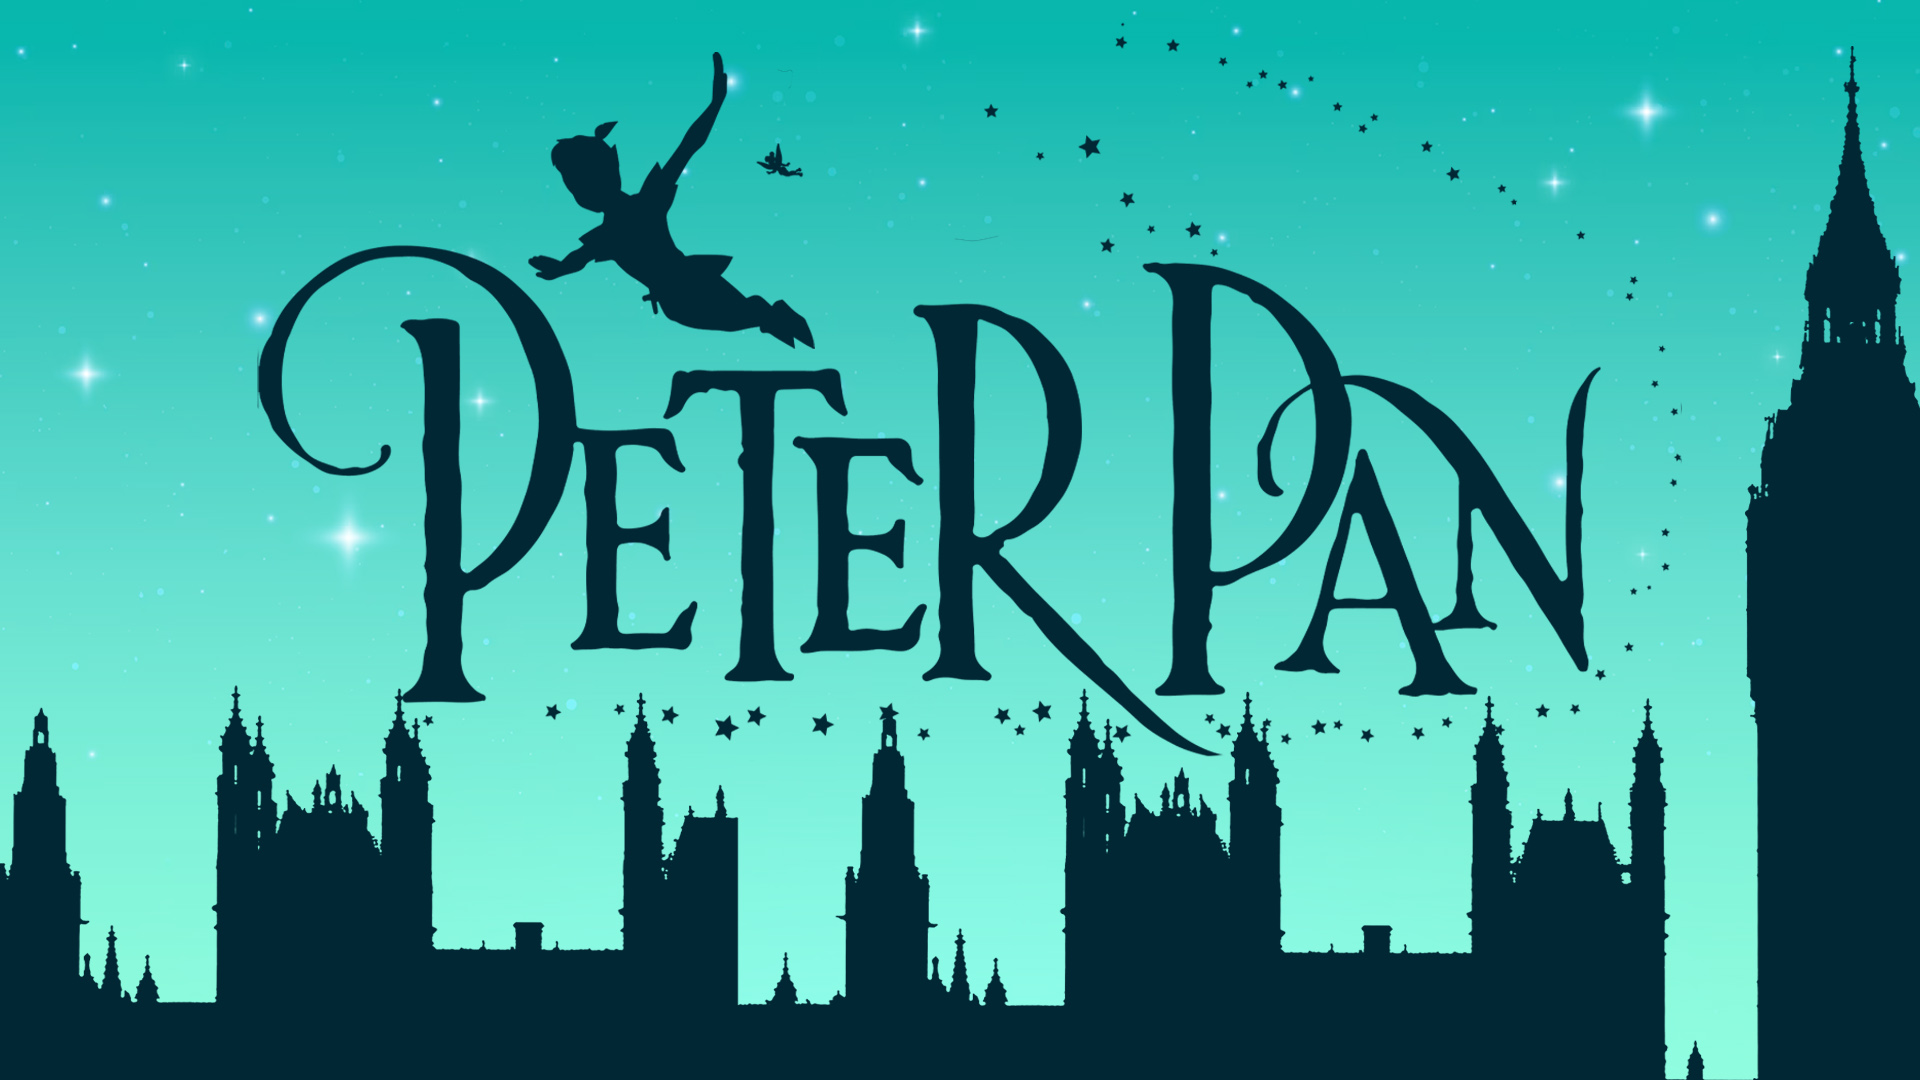 Peter Pan silhouette flying over city